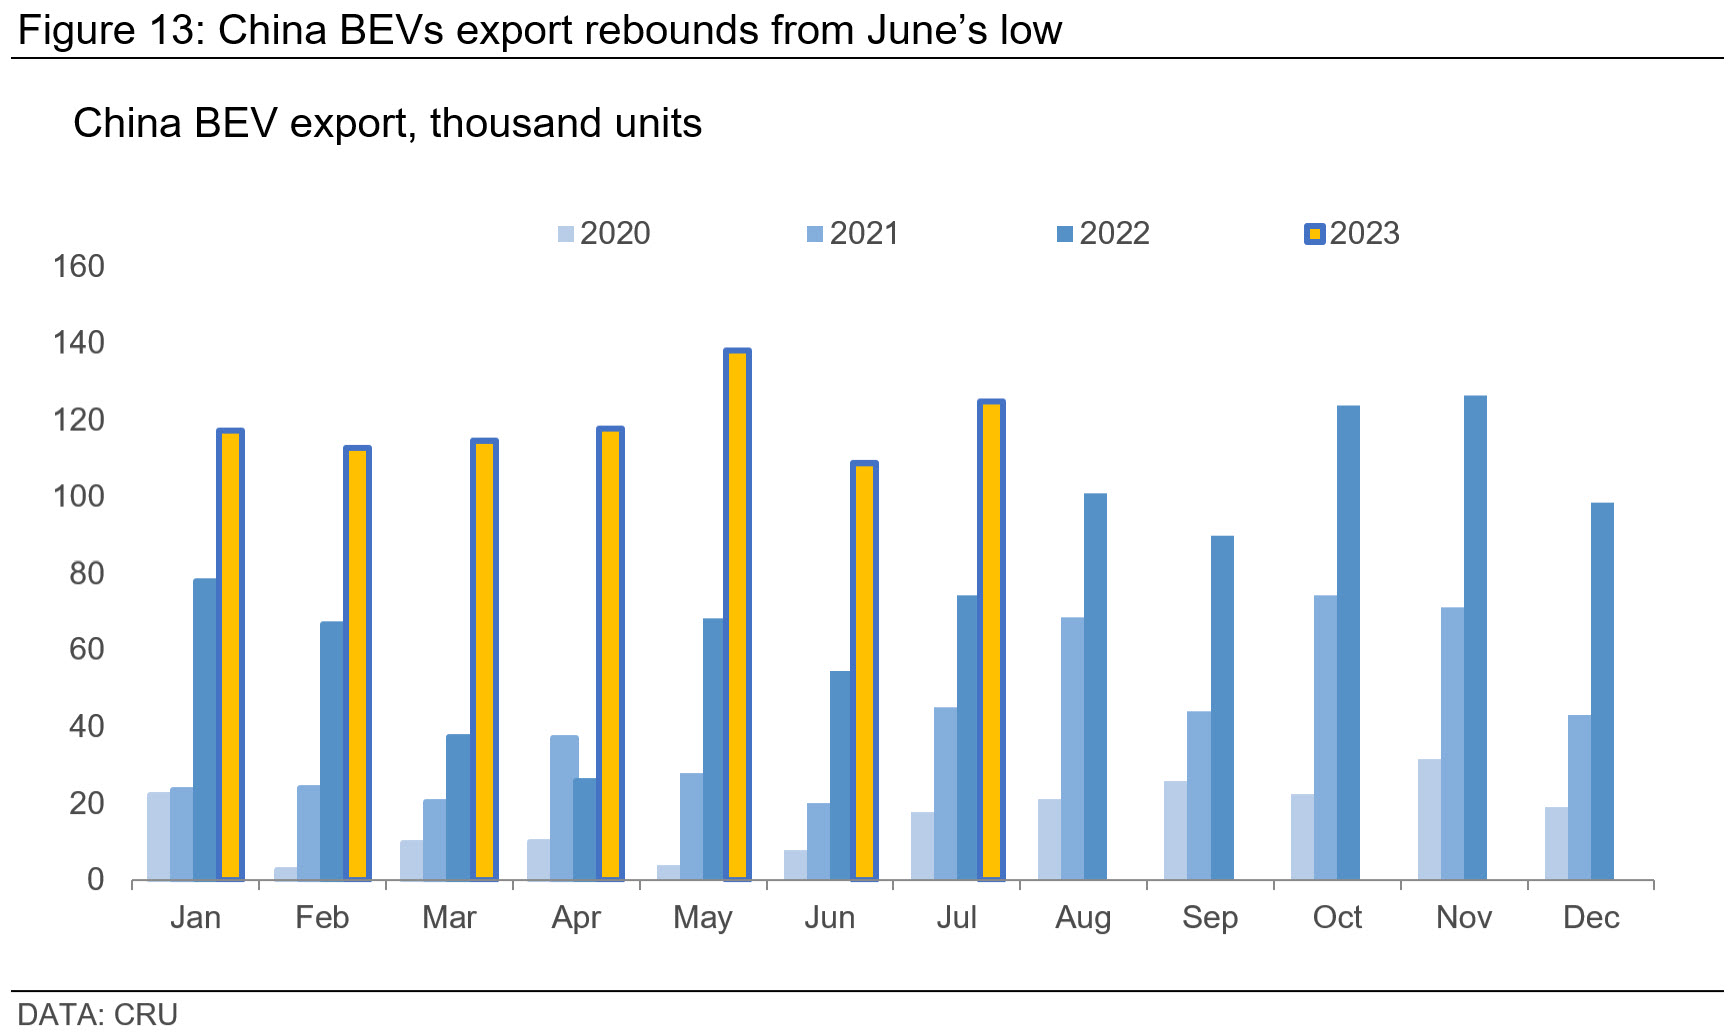 Graph showing that China BEVs export rebounds from June’s low